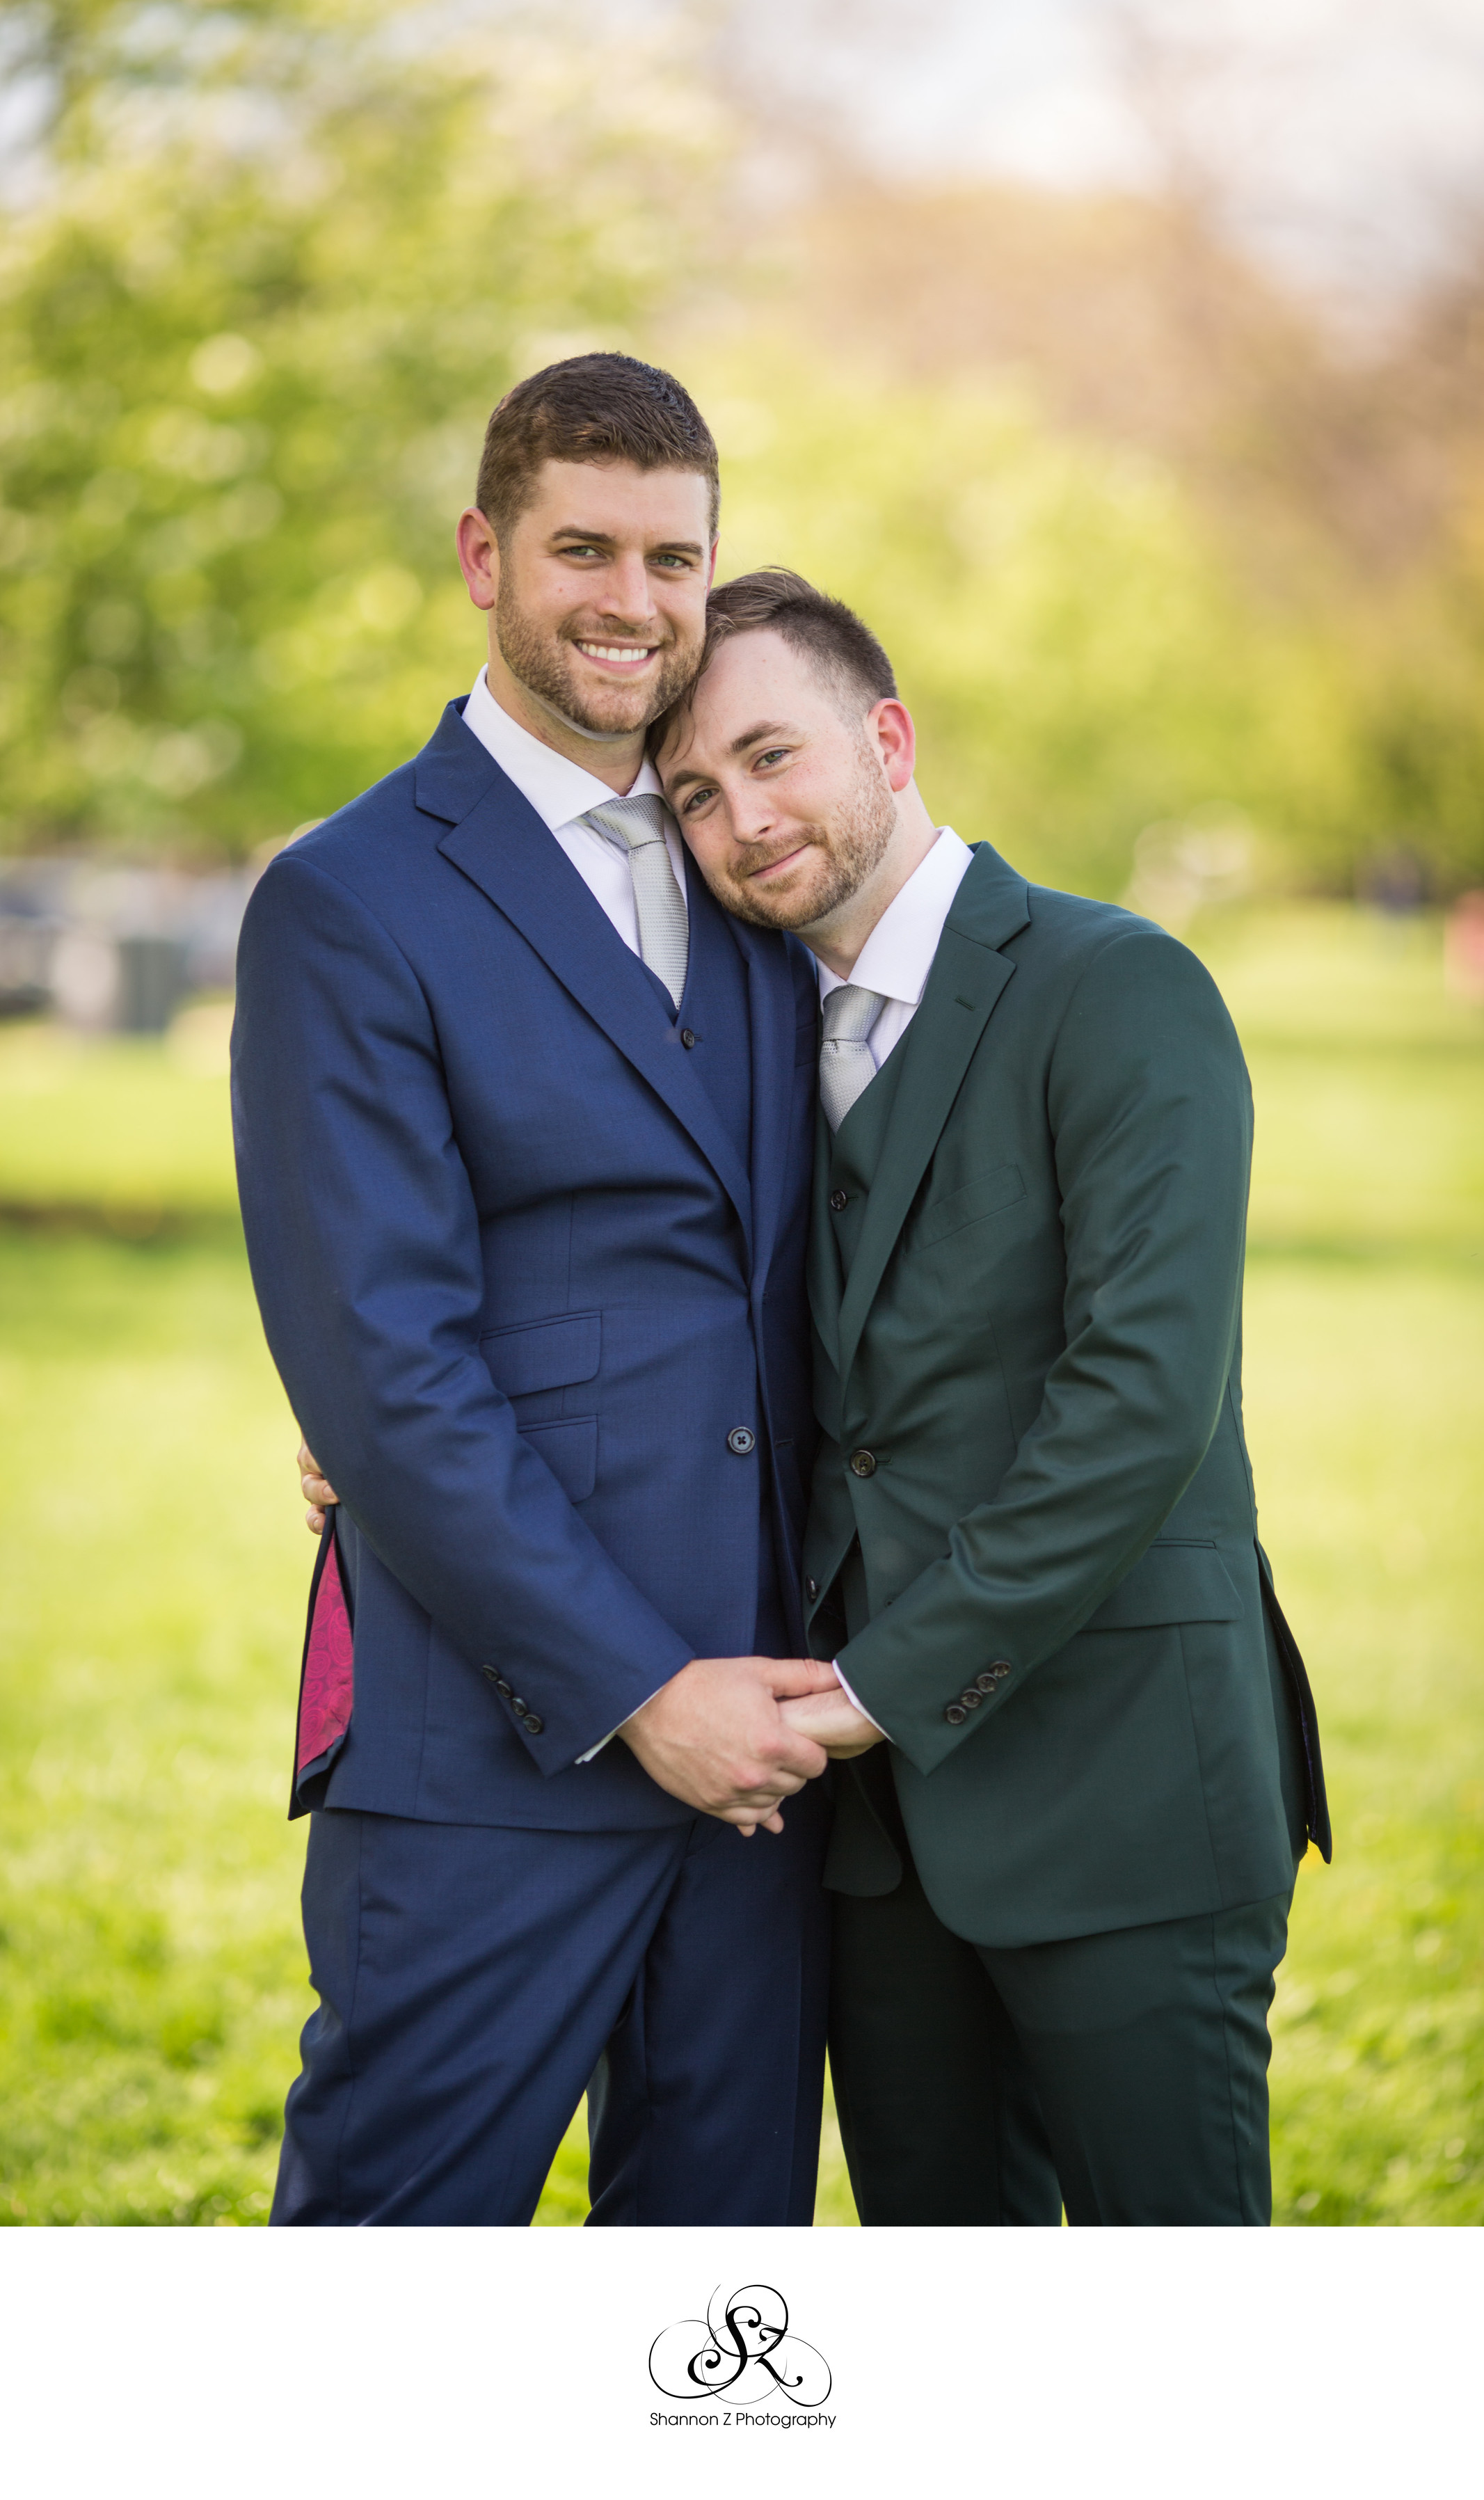 LGBTQ Friendly Wedding Photography: Two Grooms - David & Anthony ...